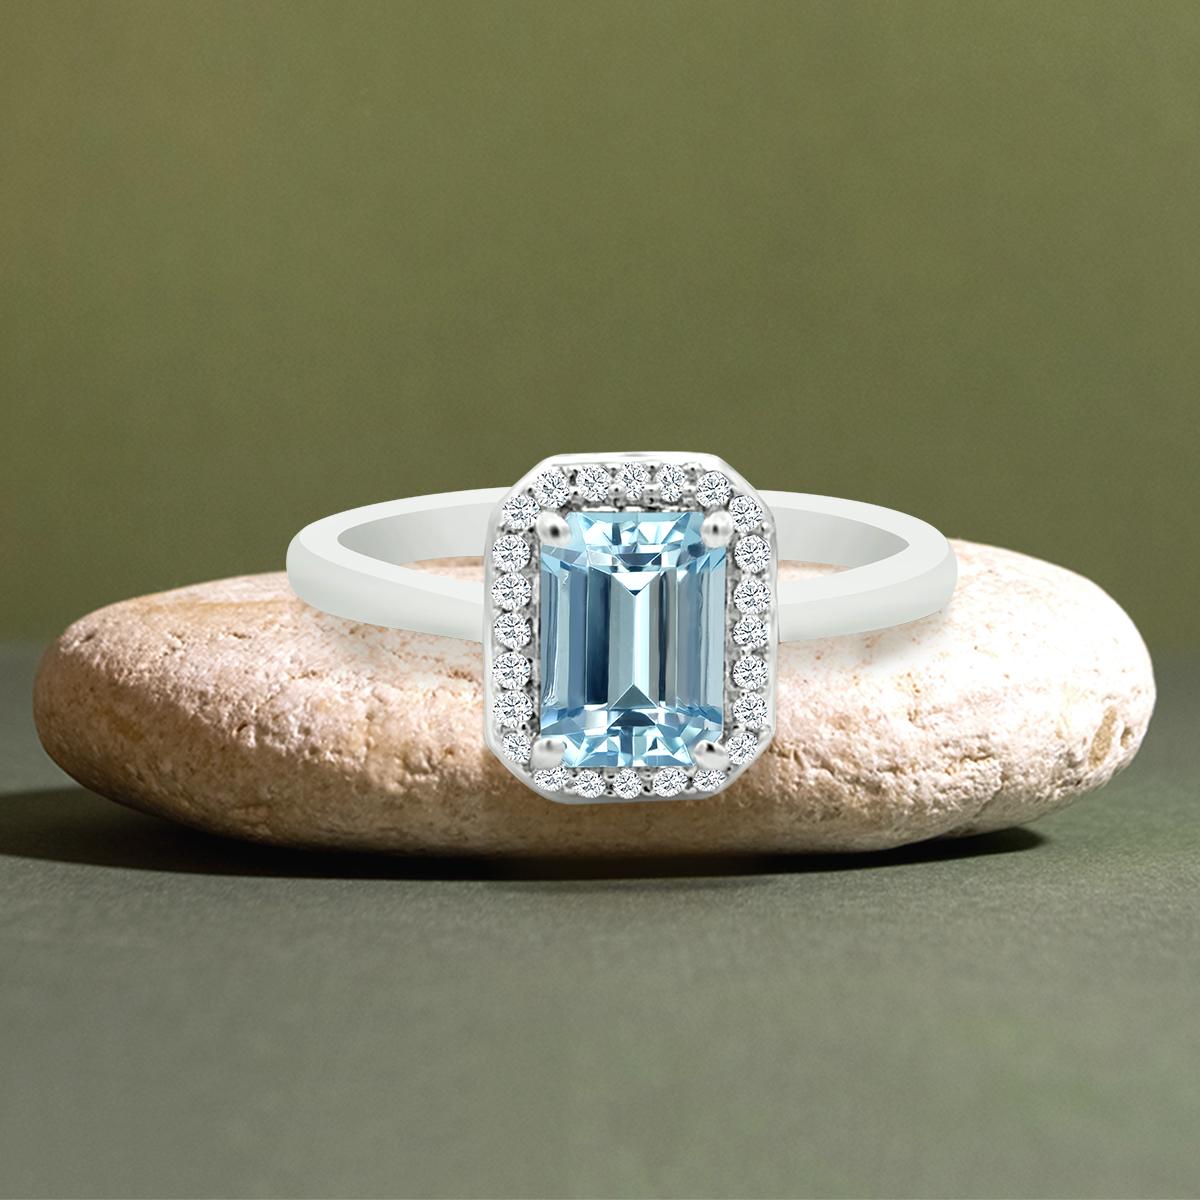 Octagon Cut 14K White Gold 0.98cts Aquamarine And Diamond Ring. Style# TS1273AQR 22032/13 For Sale